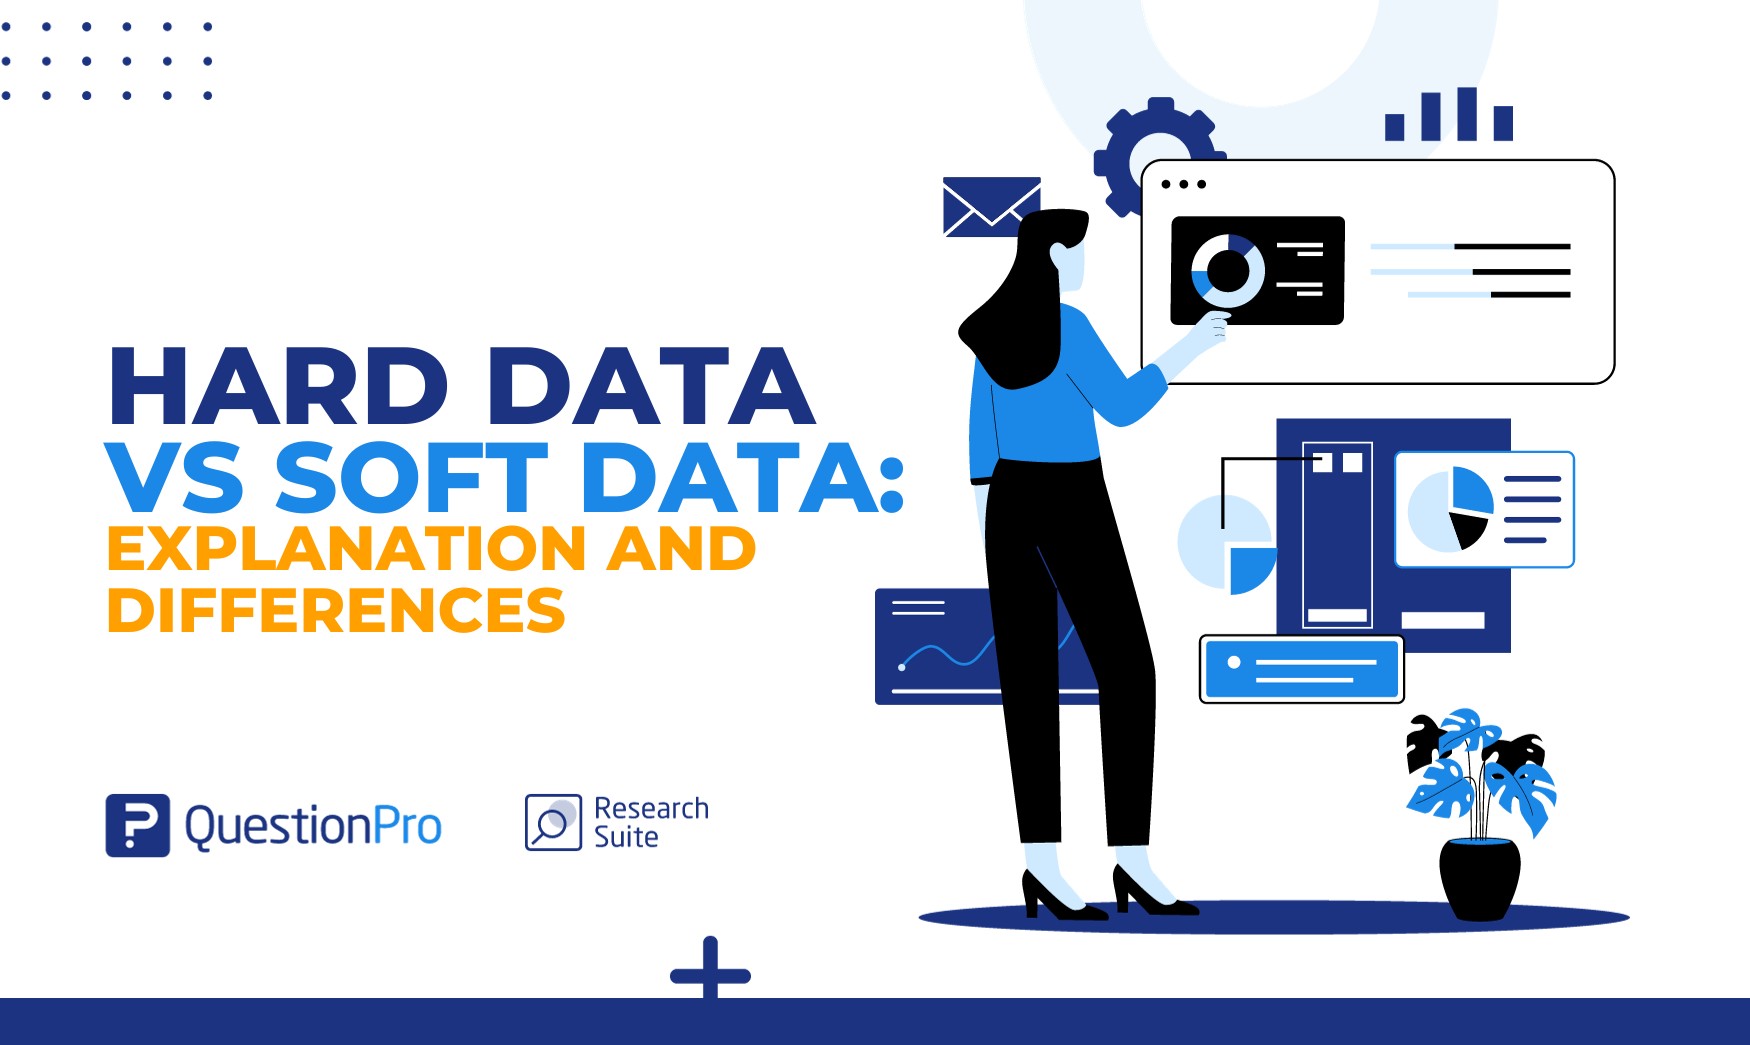 Explore the distinctions between hard data vs soft data. Uncover the nuances that differentiate these two types of information.